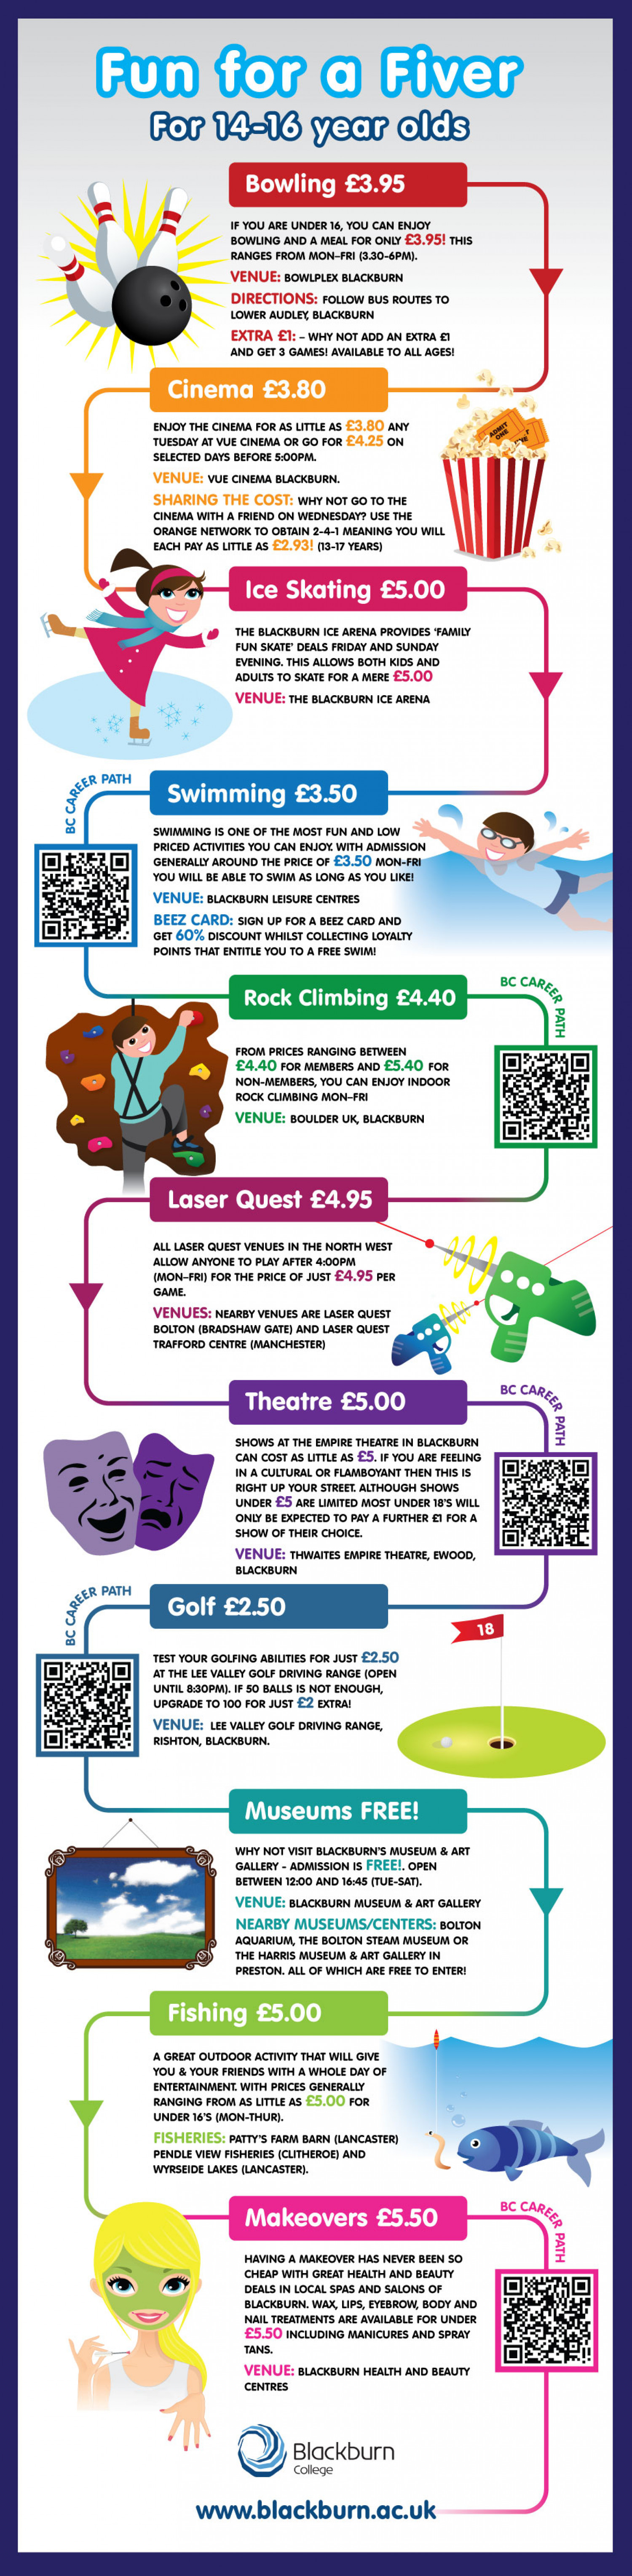 Fun for a fiver Infographic